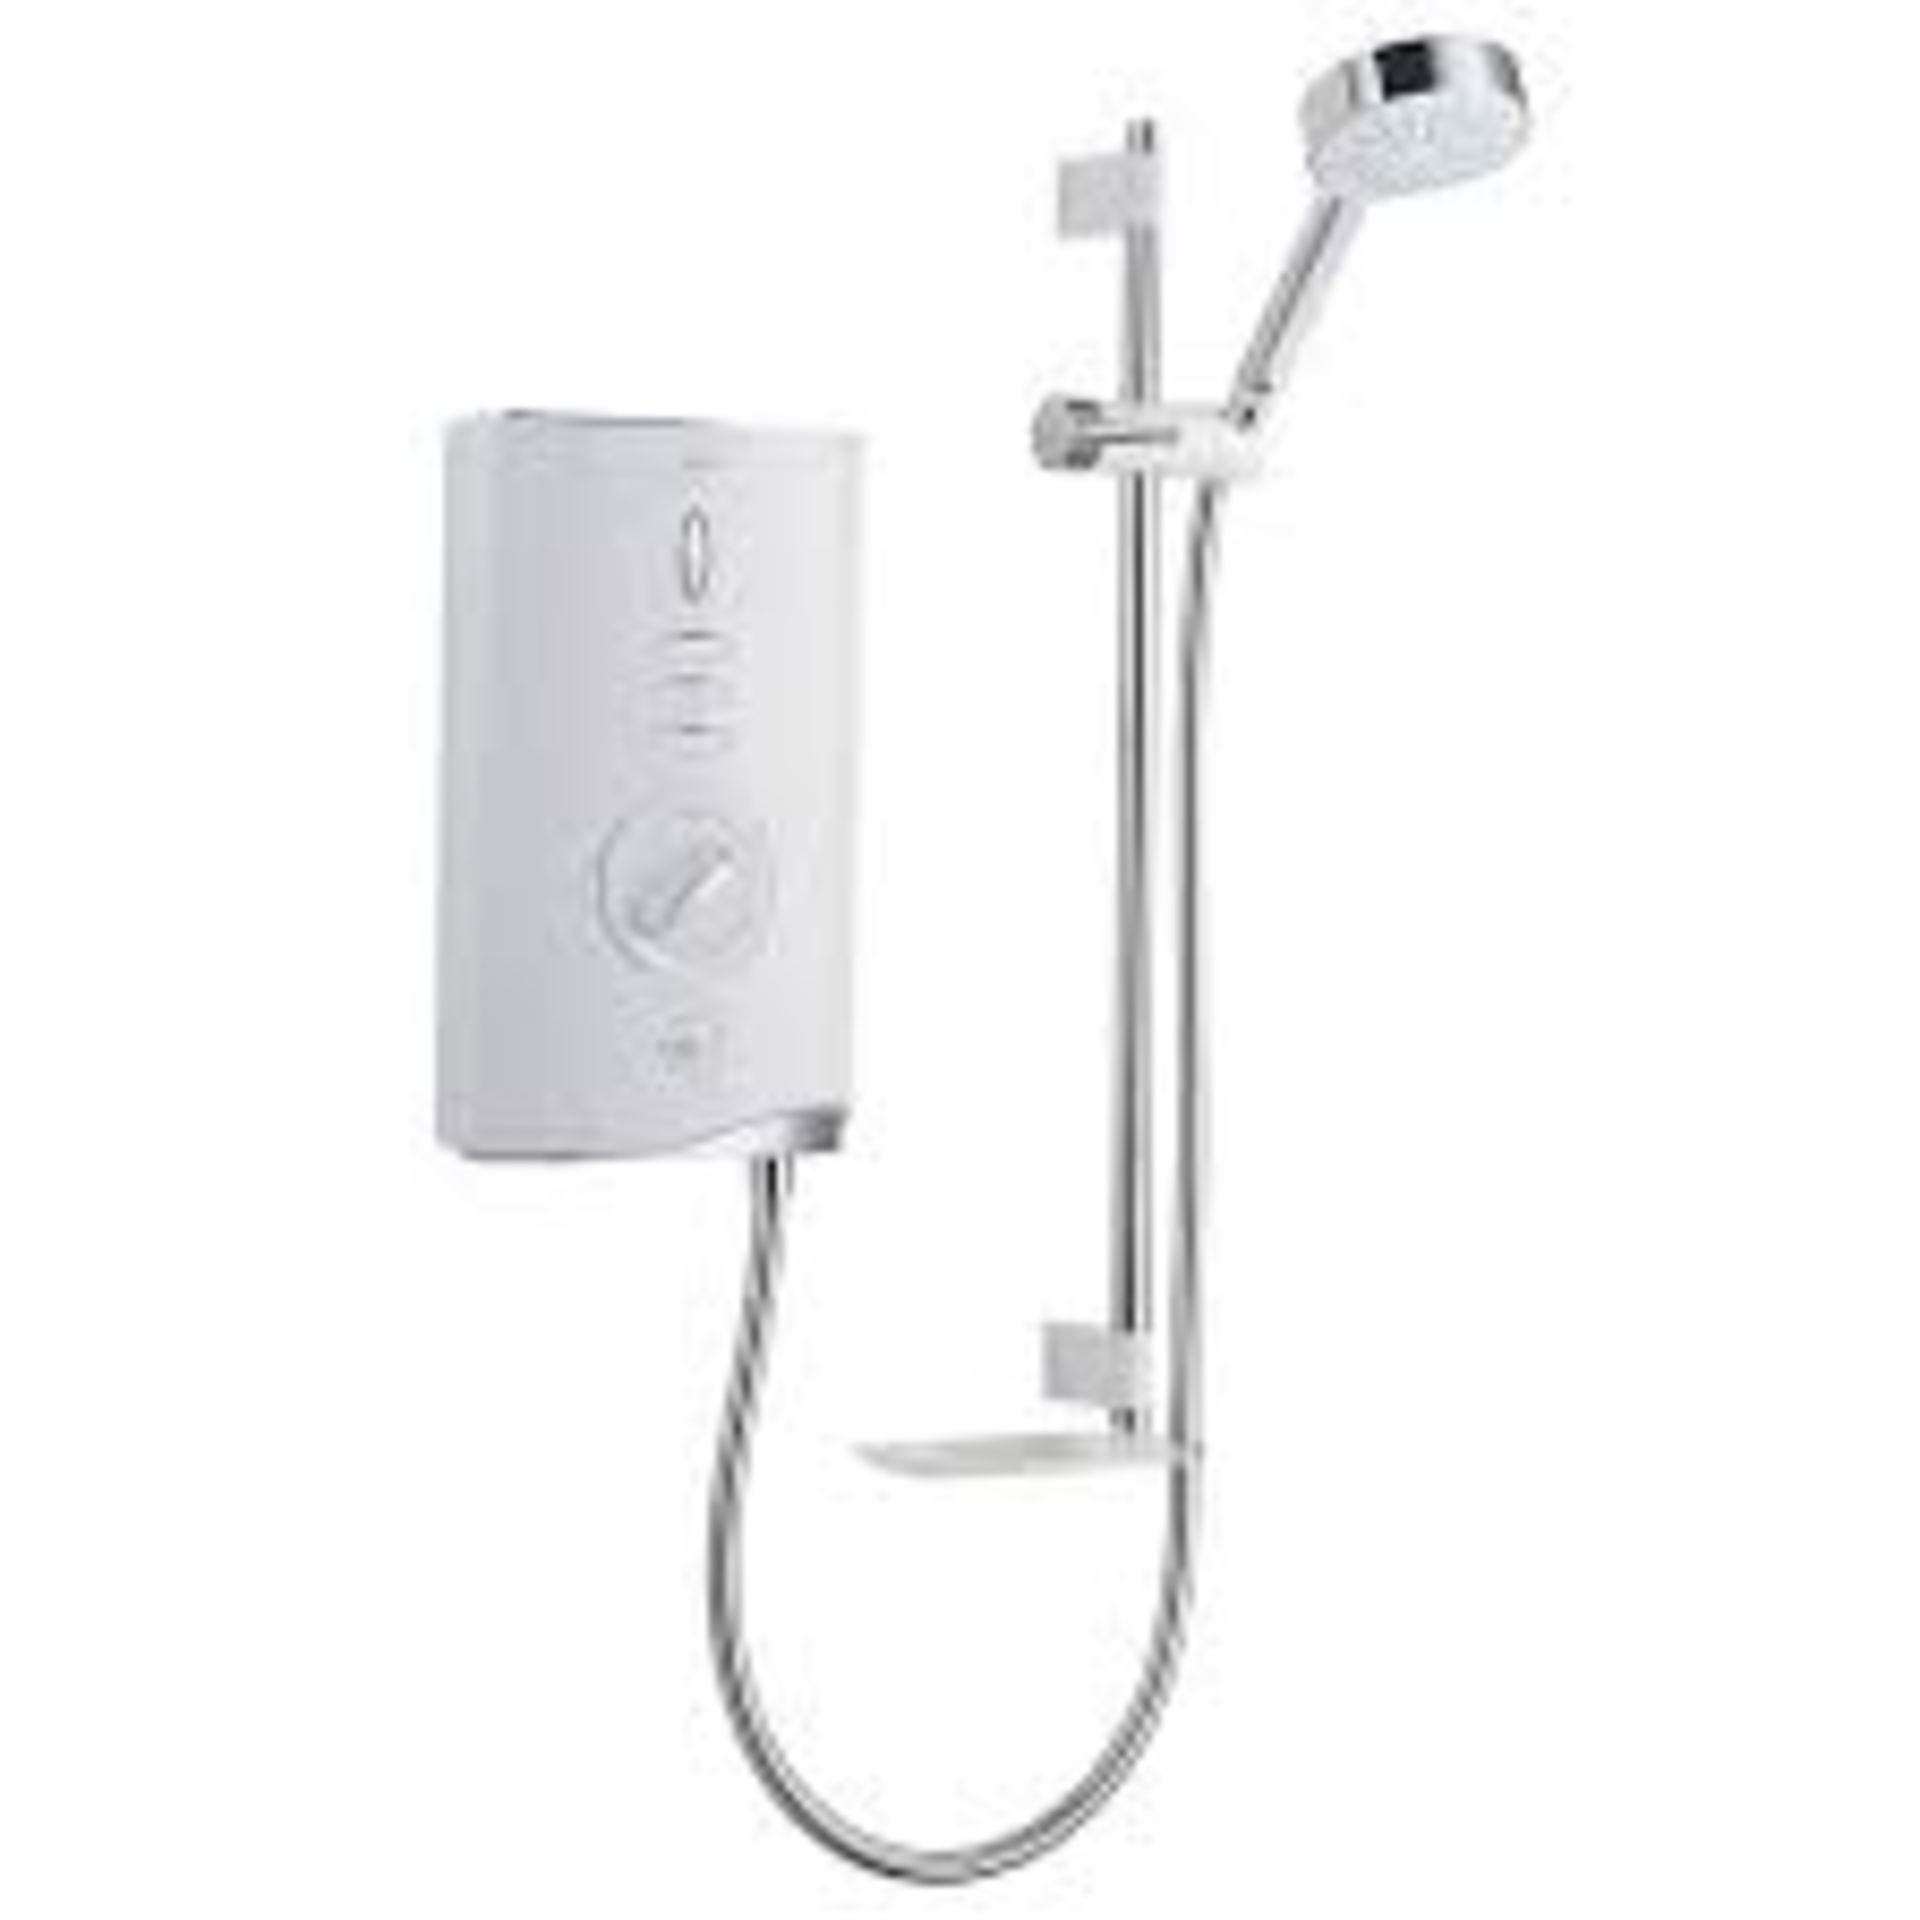 Mira Sport Max Airboost White Electric Shower, 10.8kW. - PW. Experience the power of this Mira Sport